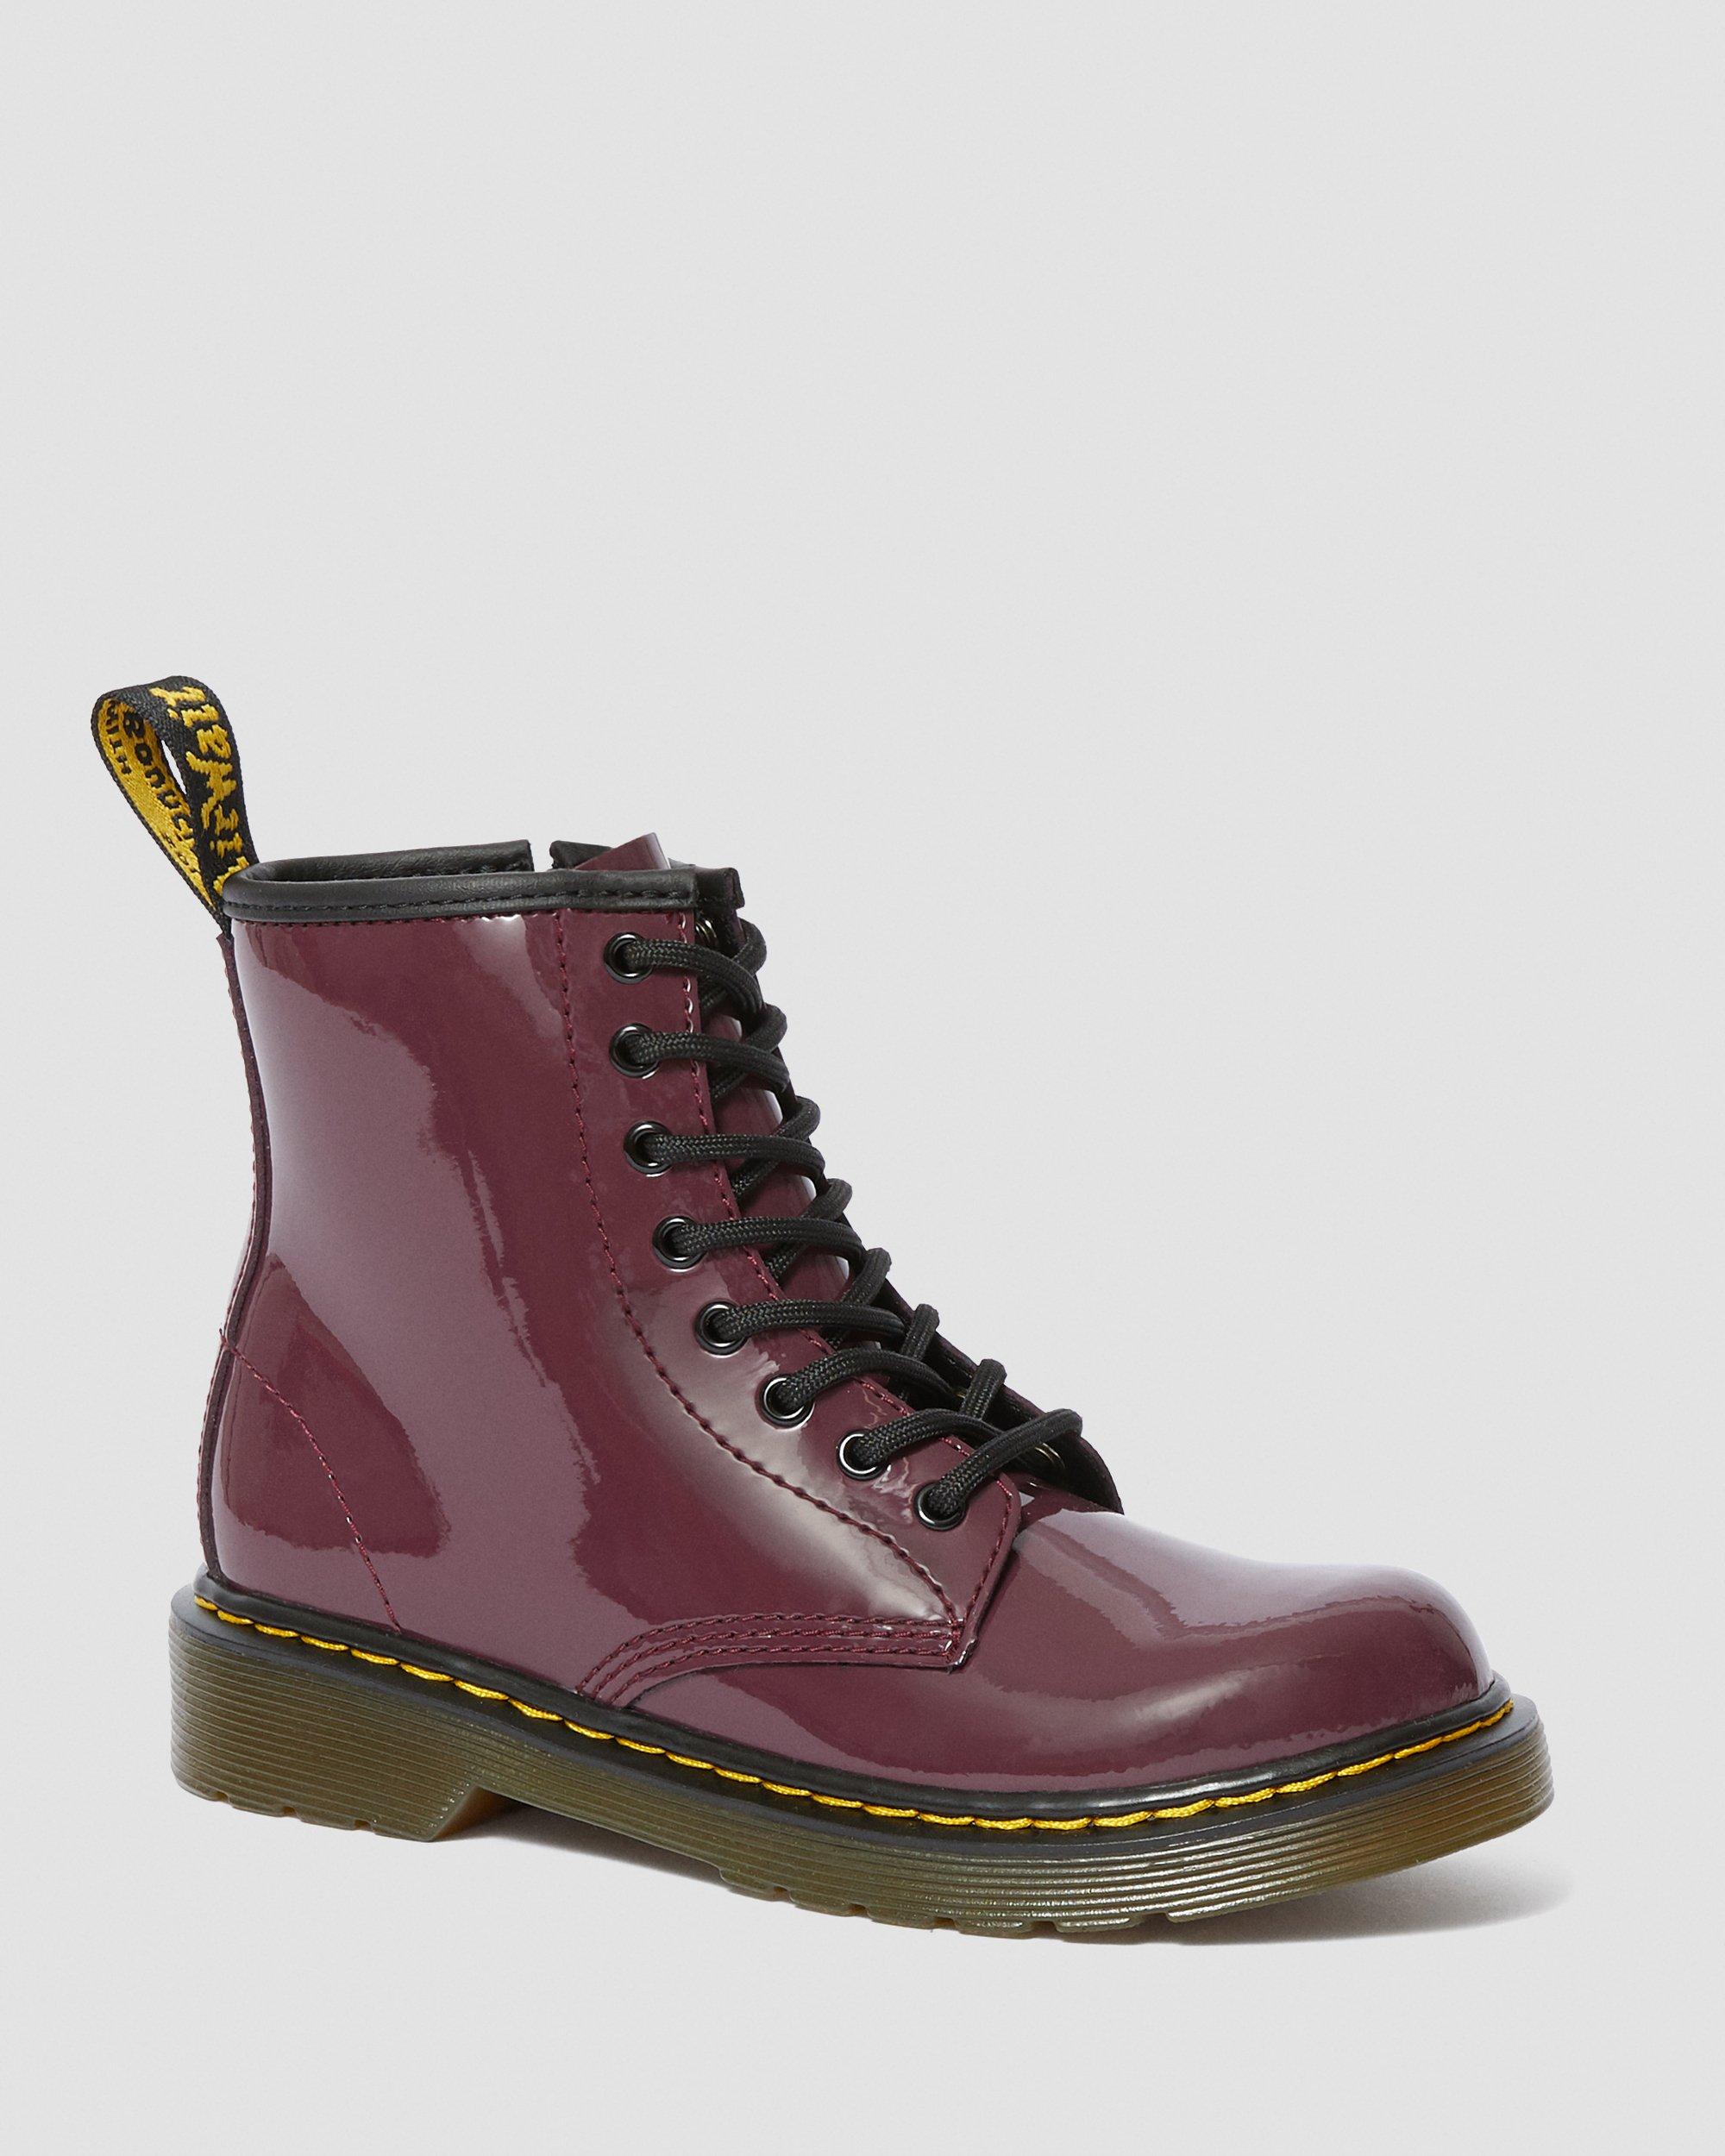 Junior 1460 Patent Leather Lace Up Boots in Dark Red